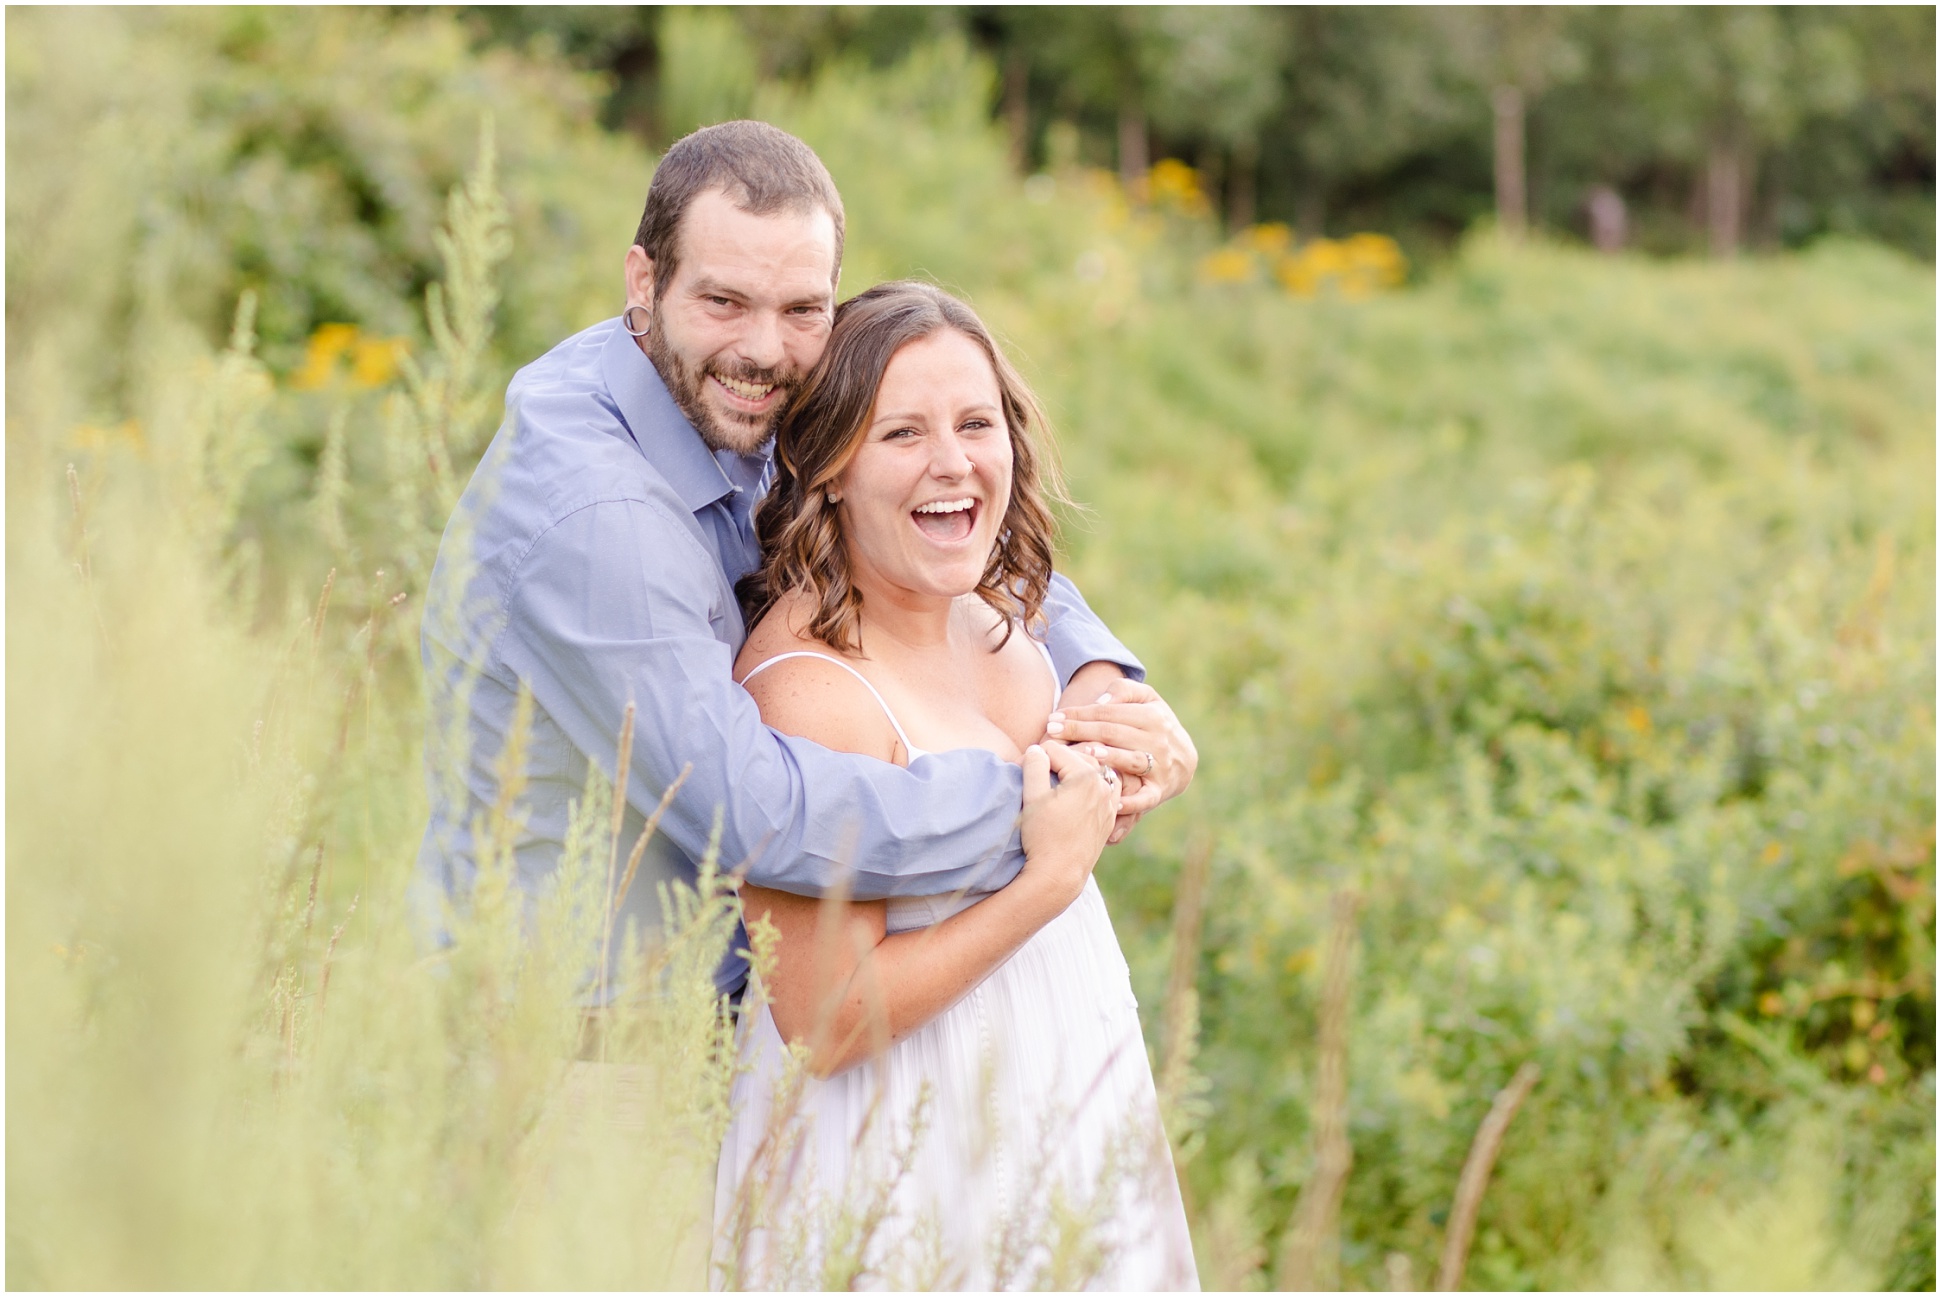 Mallory, wearing a white dress, being held by her husband Jimmy behind the tall grasses